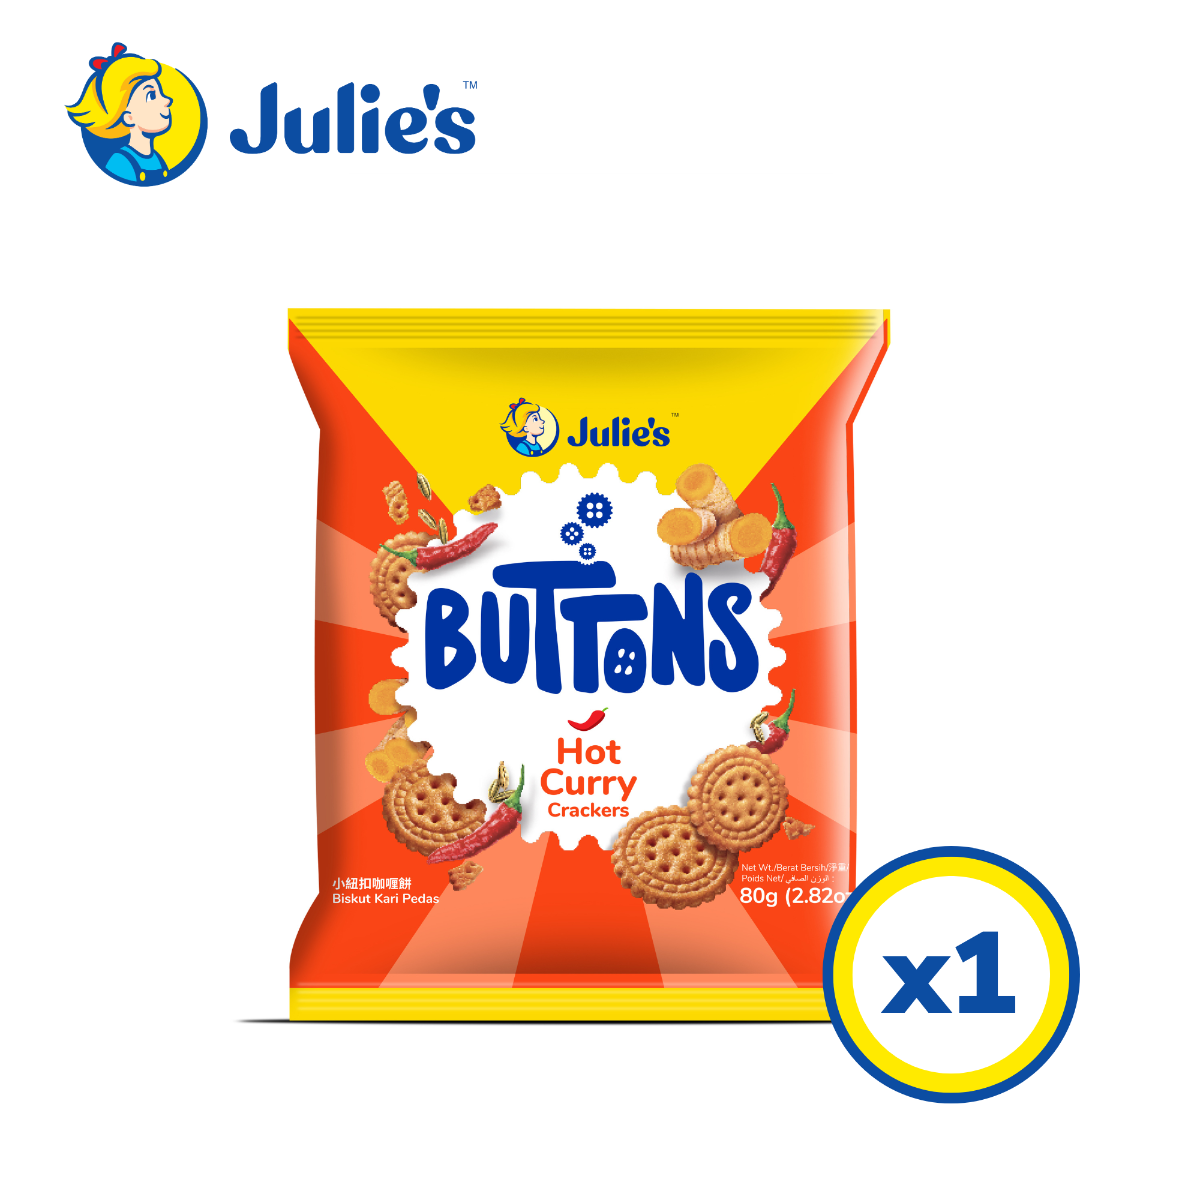 julie_s_buttons_hot_curry_crackers_80g_v1